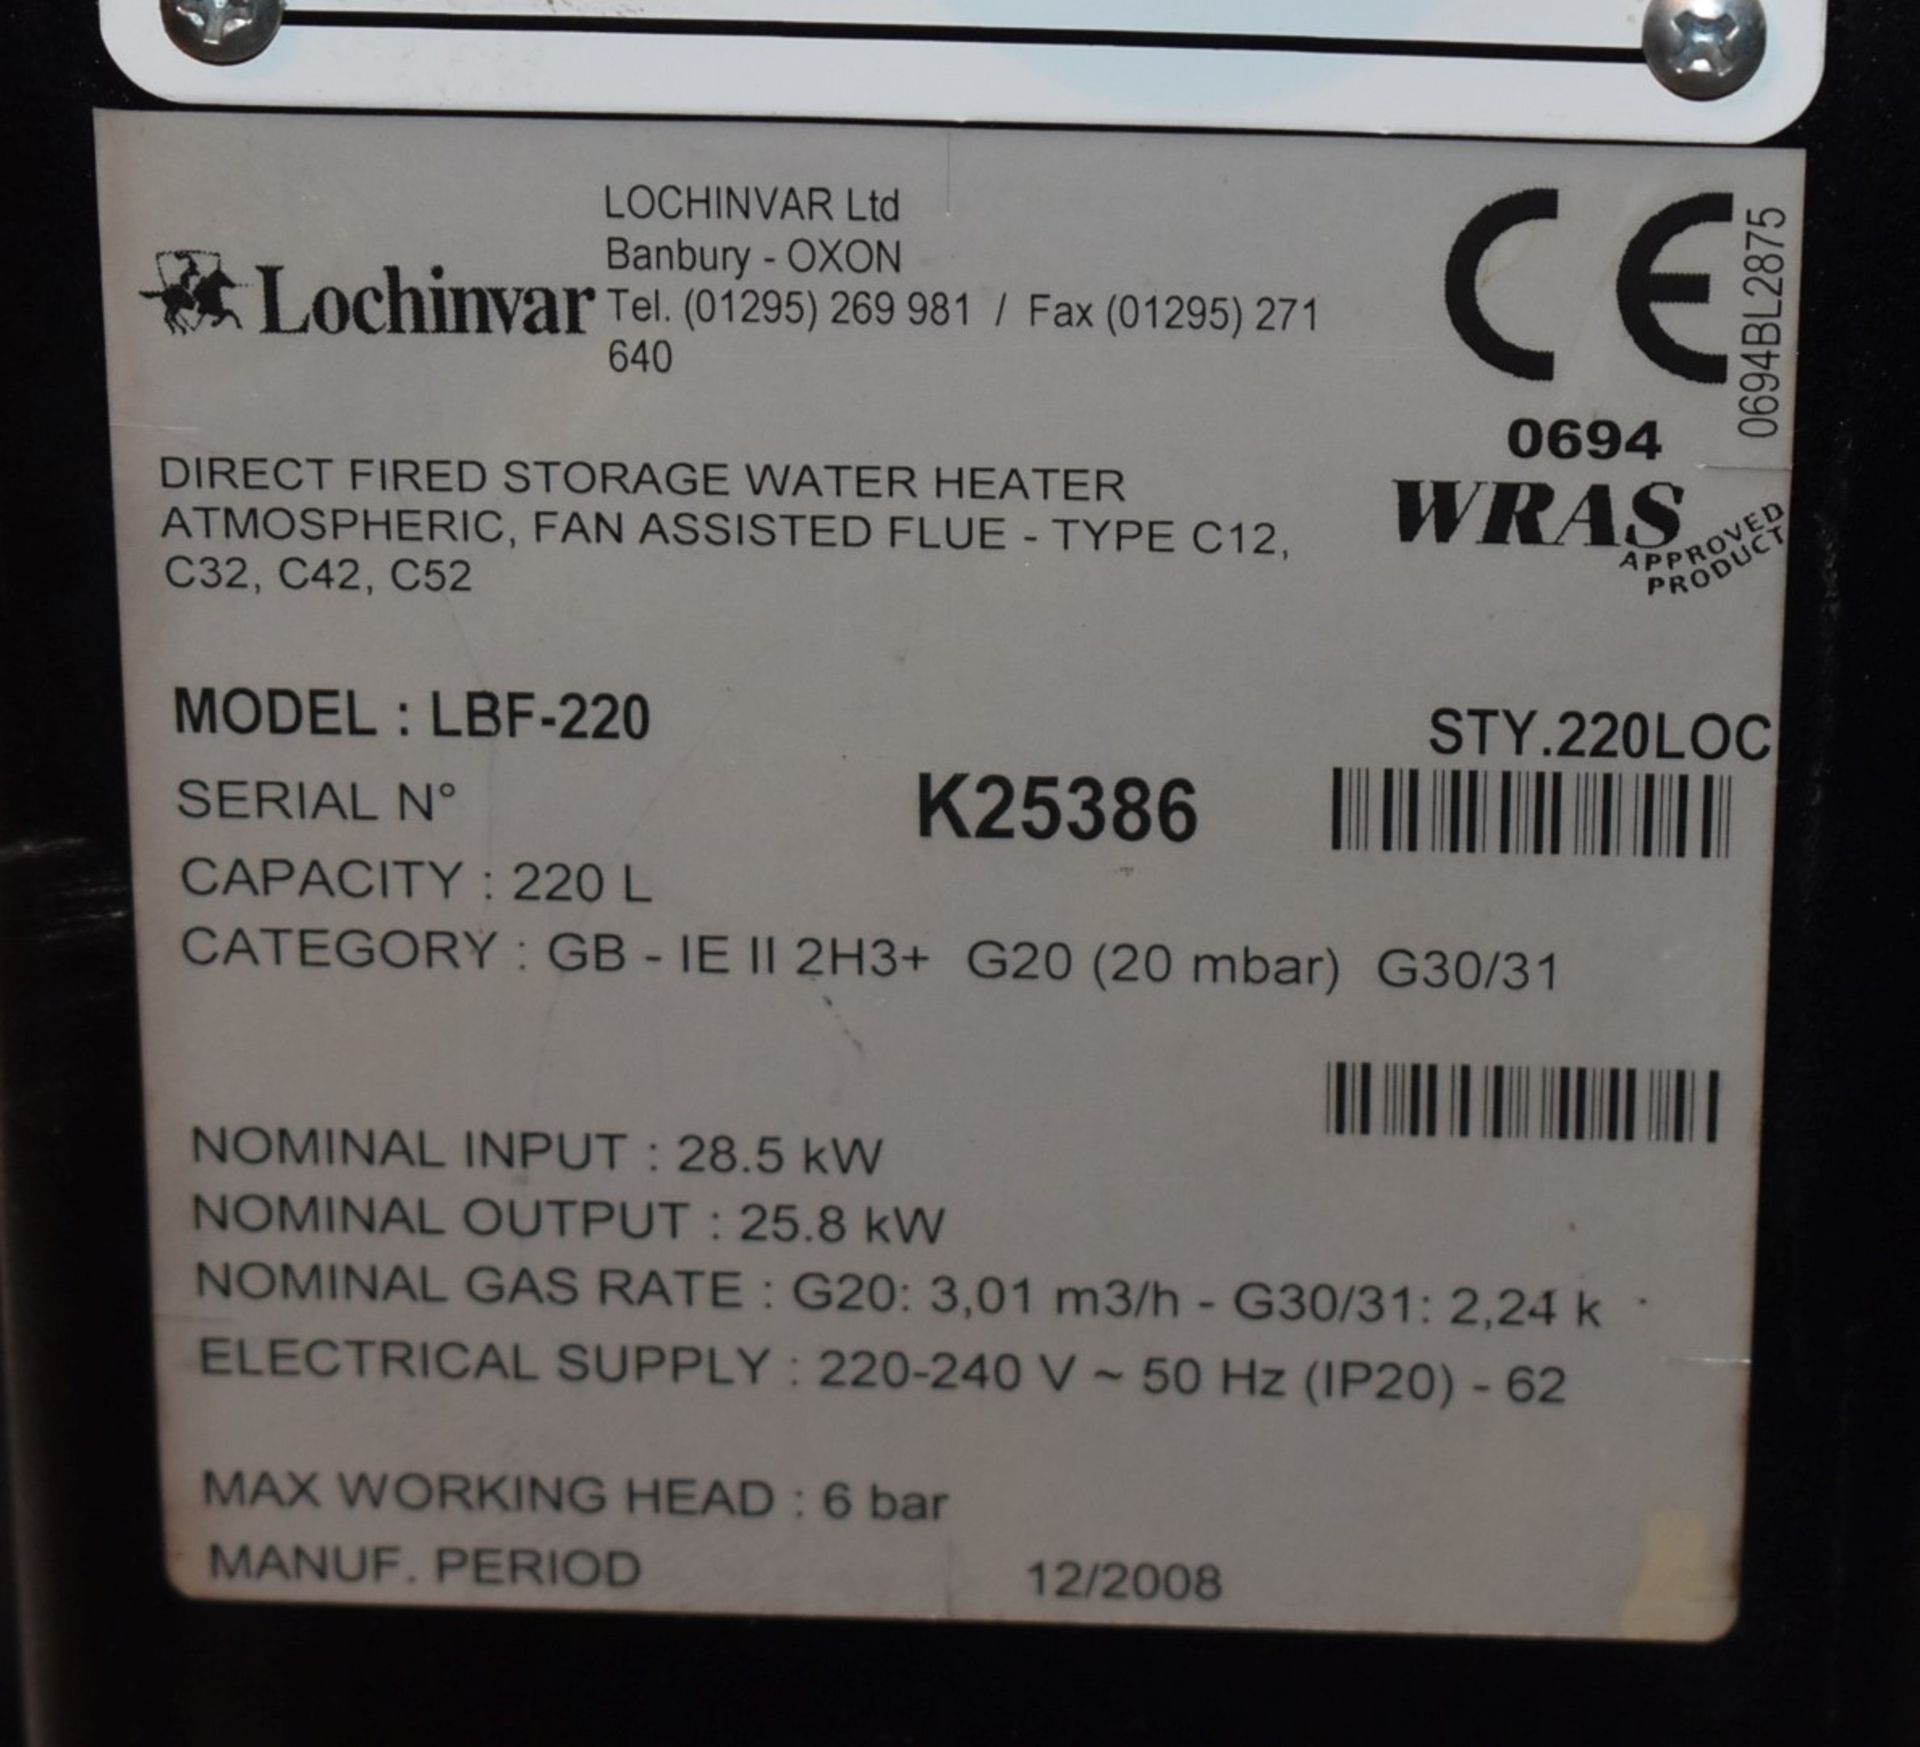 1 x Lochinvar High Efficiency Gas Fired 220L Storage Water Heater - Model LBF-220 - Ref: WH2-145 H5D - Image 11 of 14